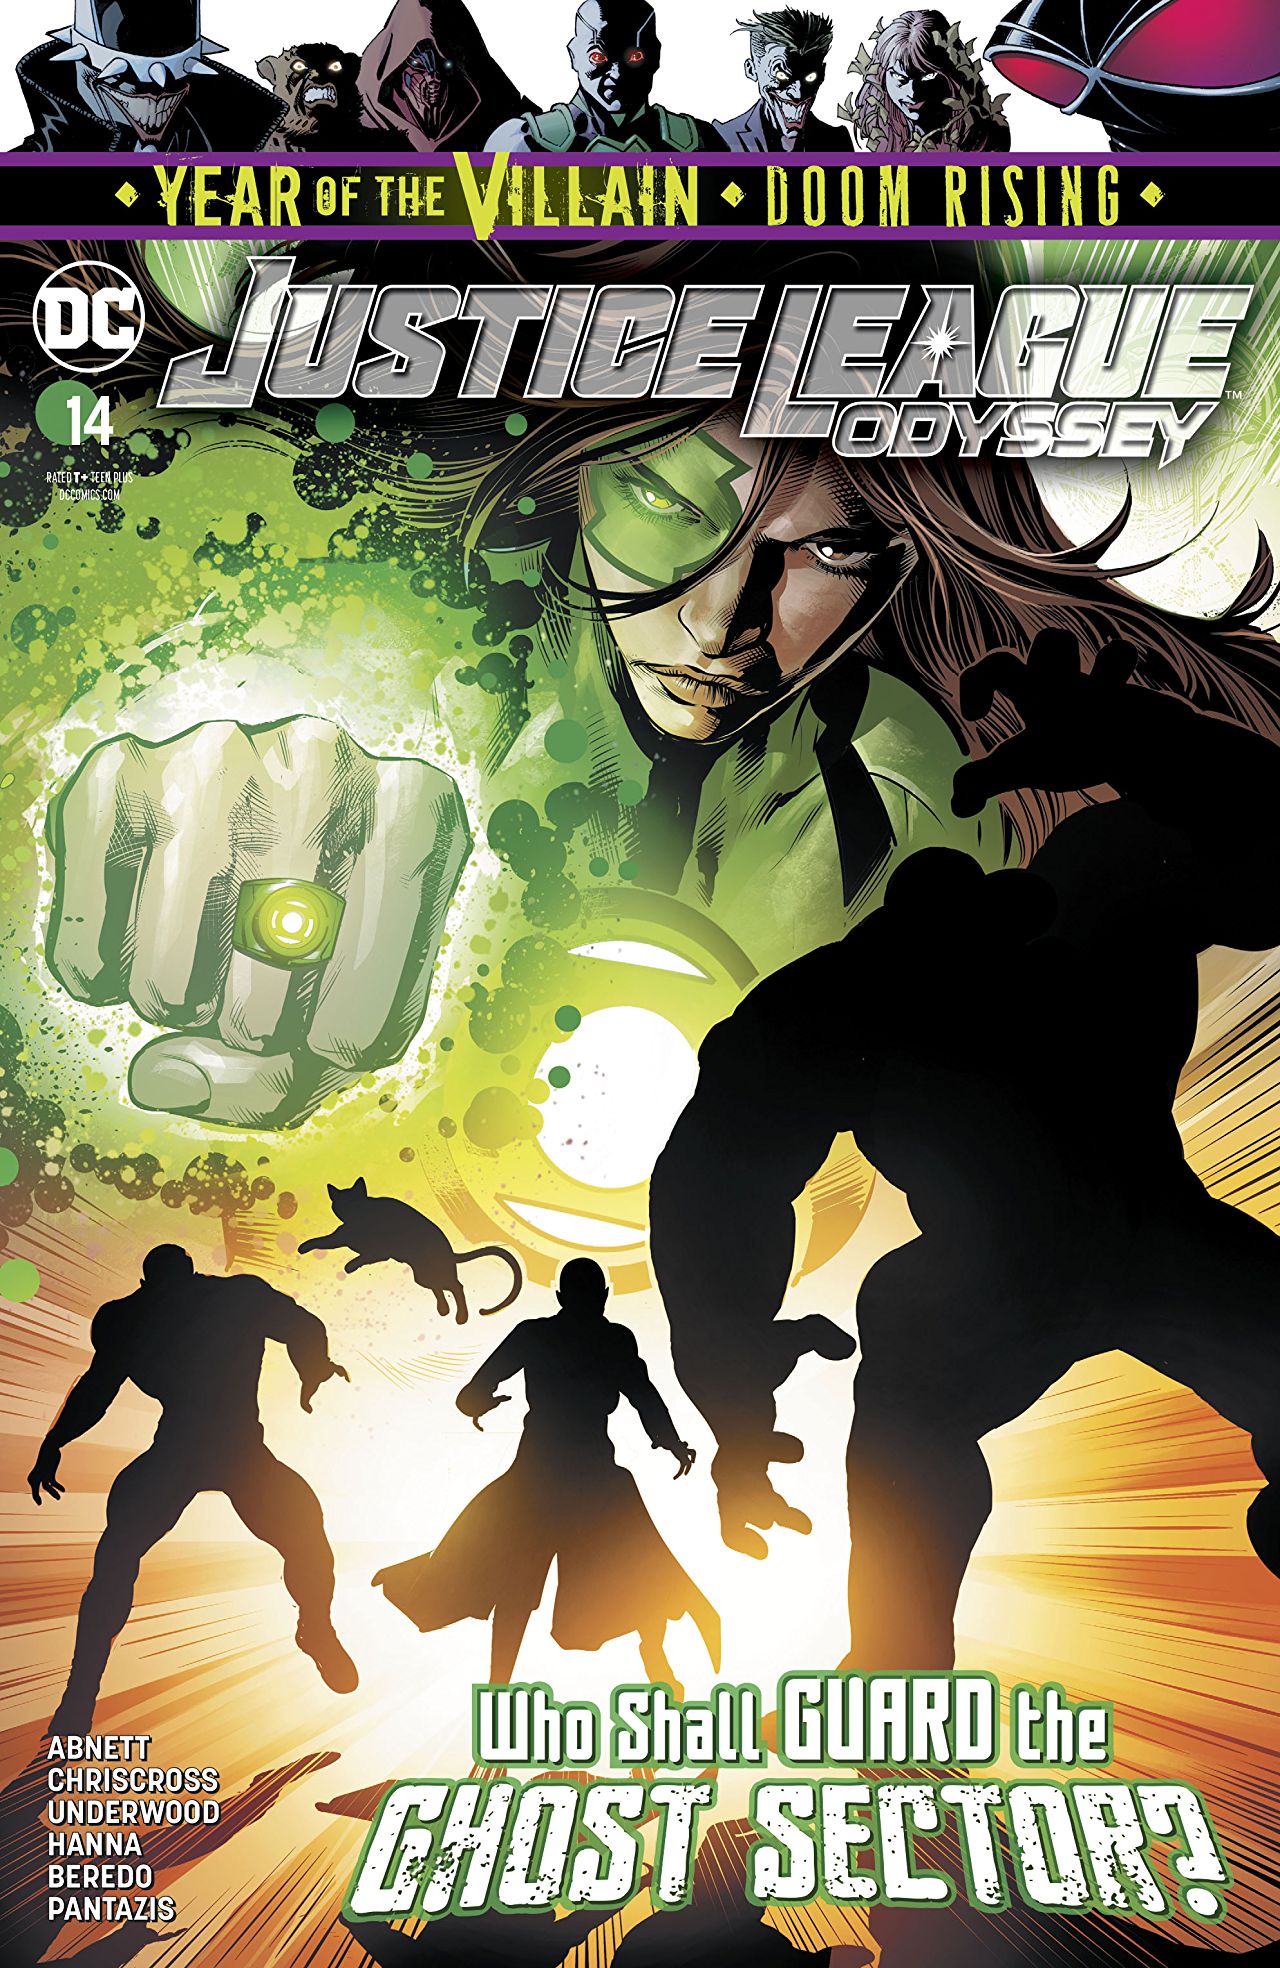 Justice League Odyssey #14 review: Masks